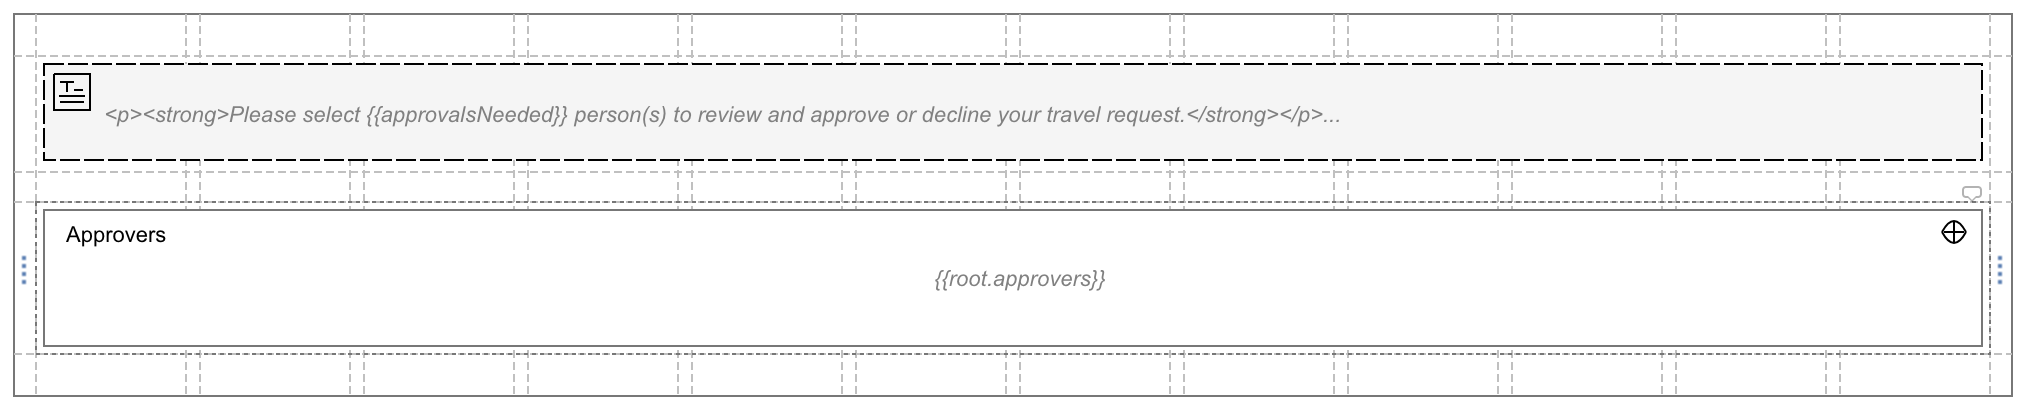 48 select approvers task form